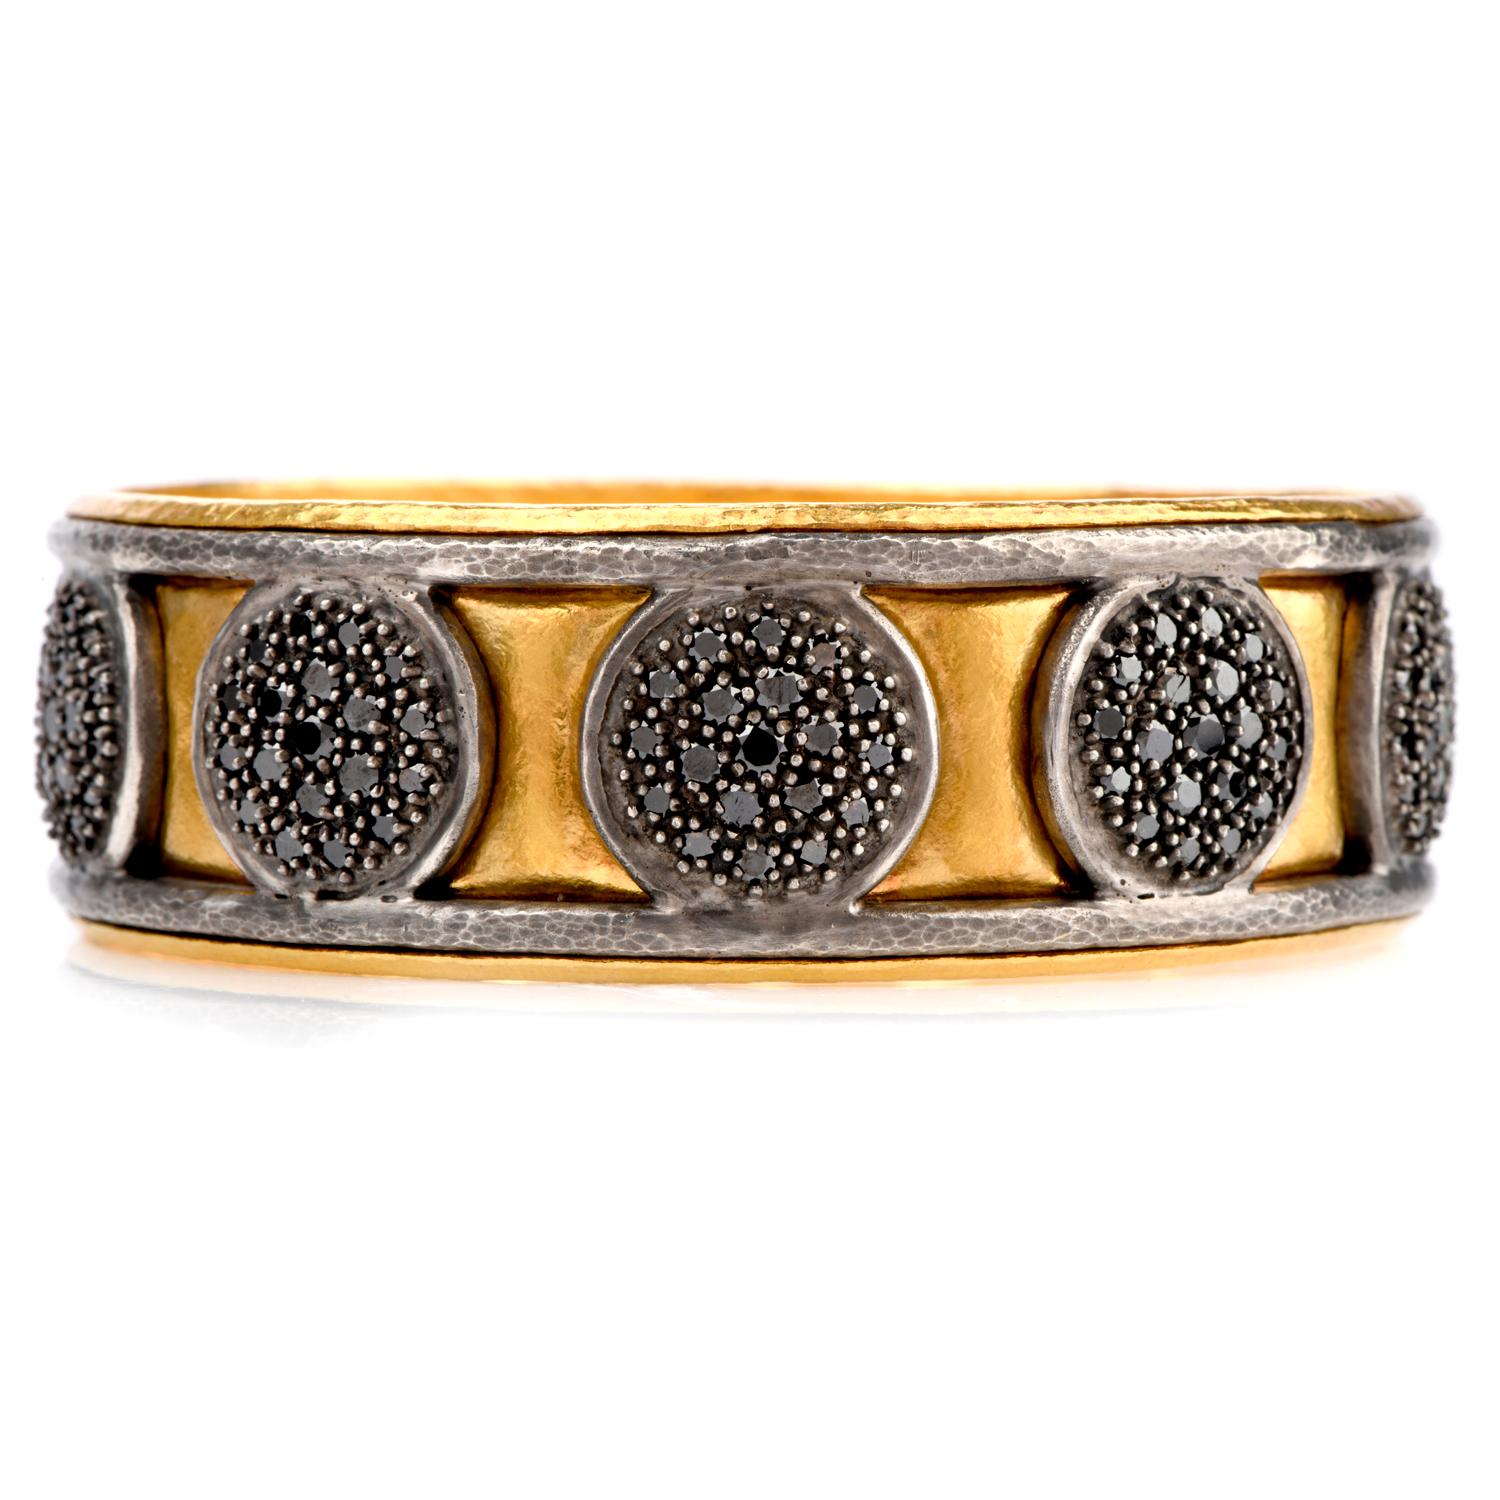 An incredible wide hand hammered finished bangle bracelet by Gurhan bearing a repeating

circular motif around and crafted in Pure 24K gold and some Silver.

Featuring 10 circular discs with approx. 190 black round faceted 

diamonds prong set. 